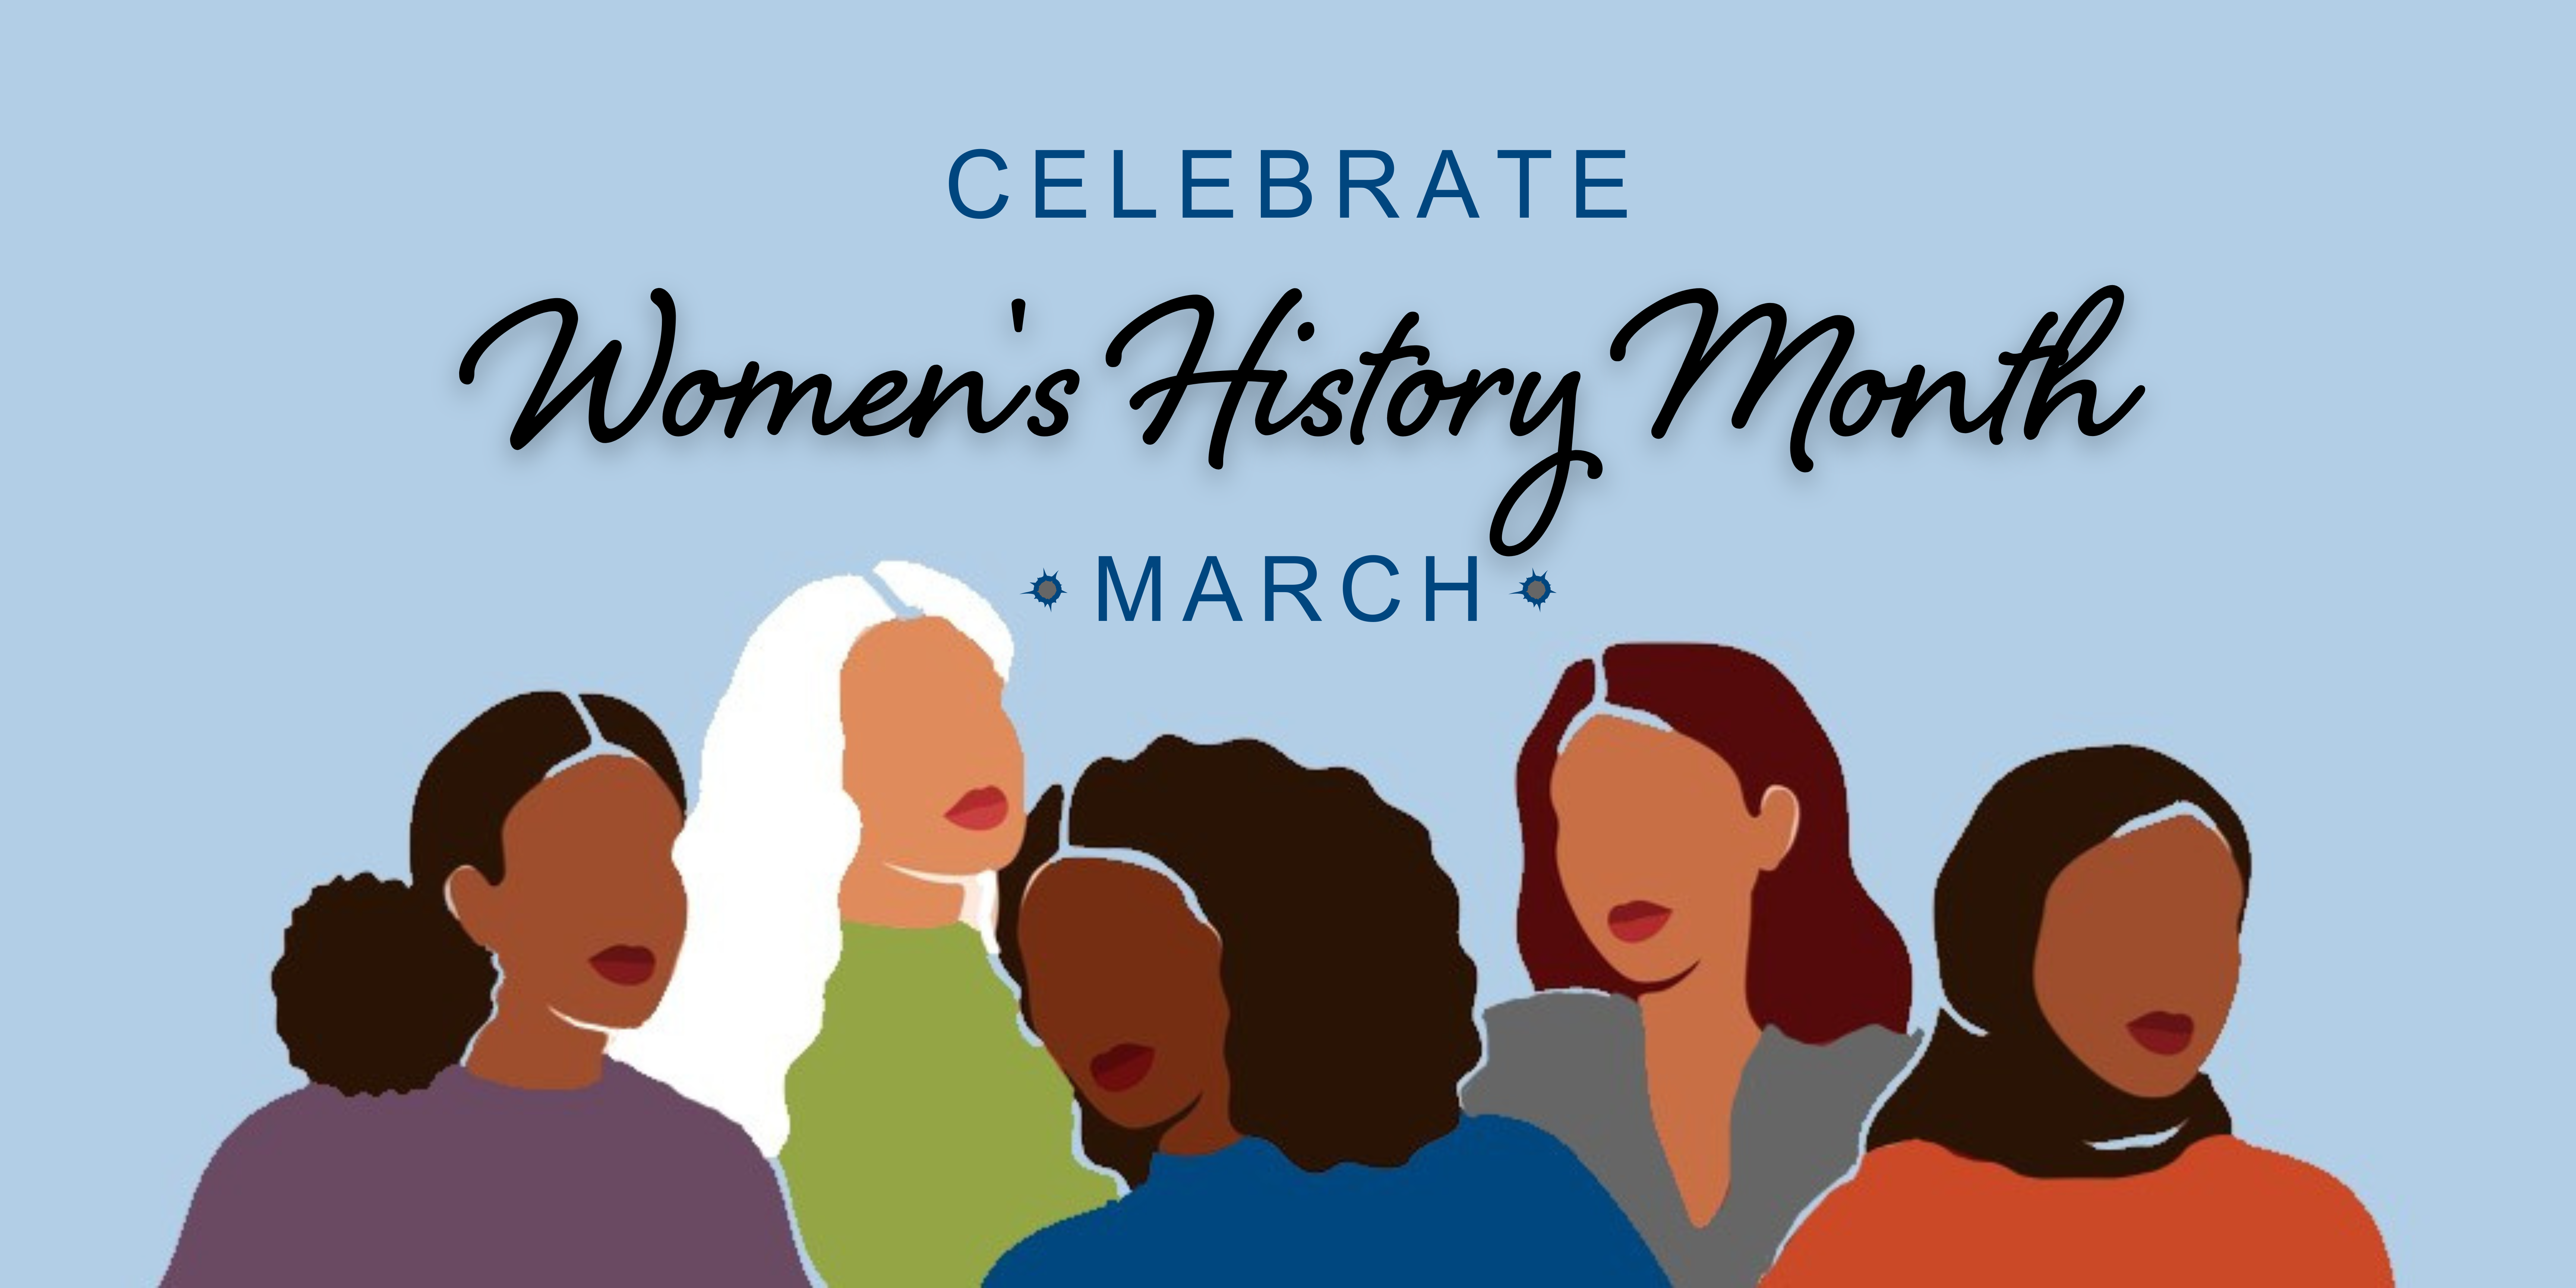 Illustration of a group of women celebrating March as National Women's History Month